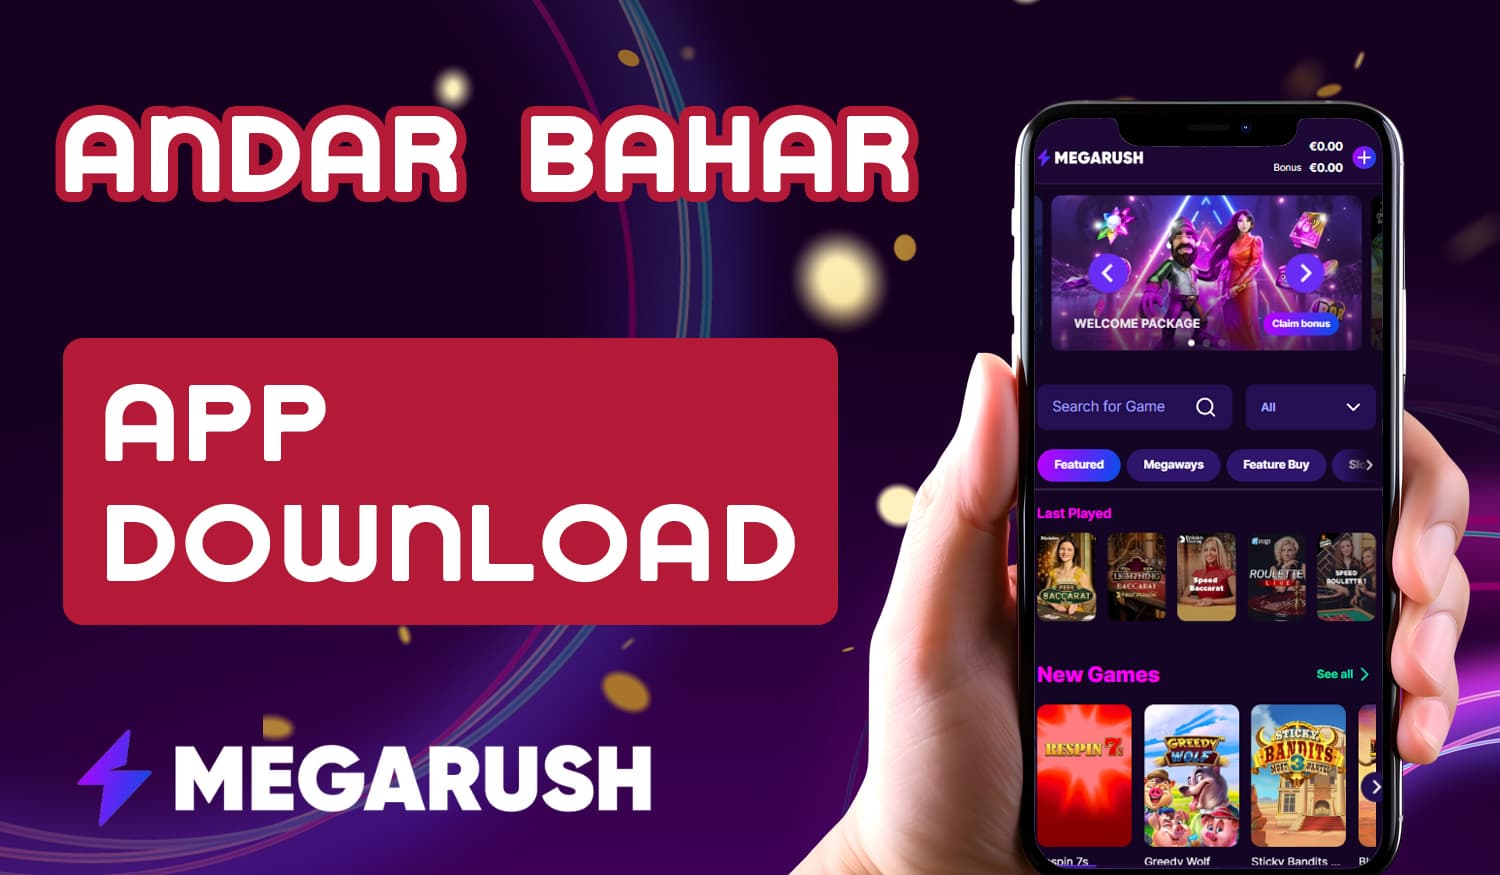 Why Indian users should try Andar Bahar game on Megarush mobile app